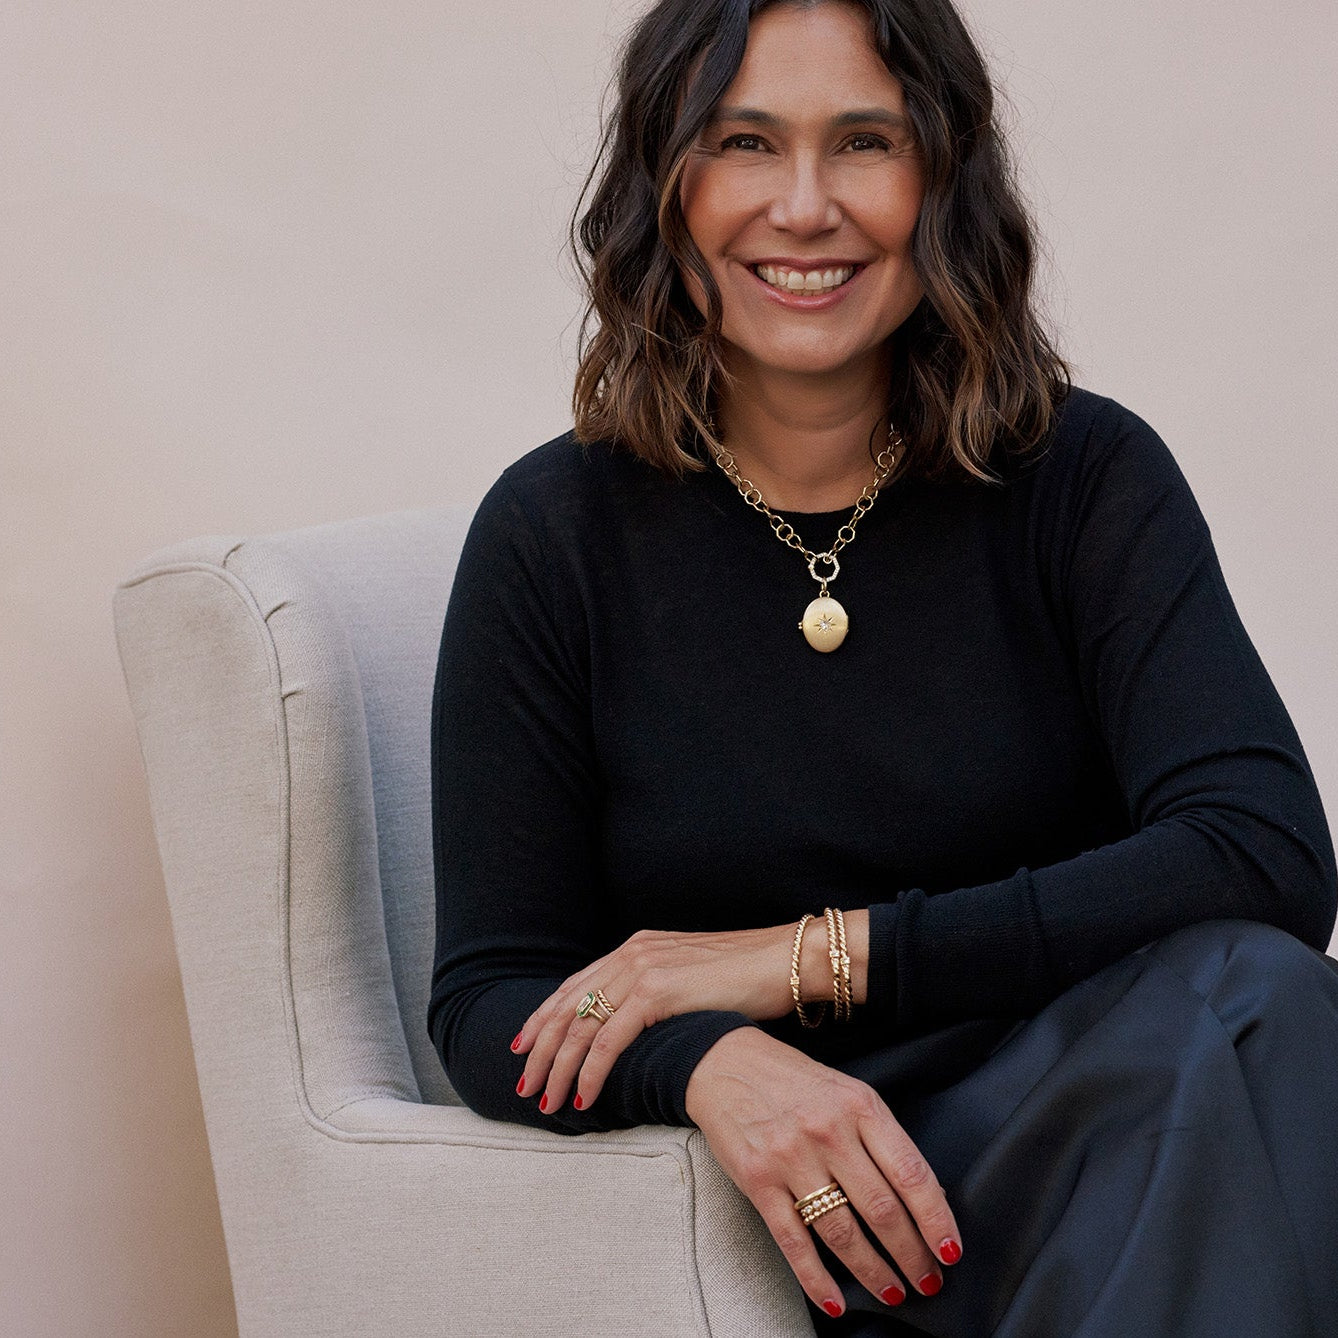 Designer Corina Madilian sitting in chair and smiling at the camera while wearing Single Stone jewelry